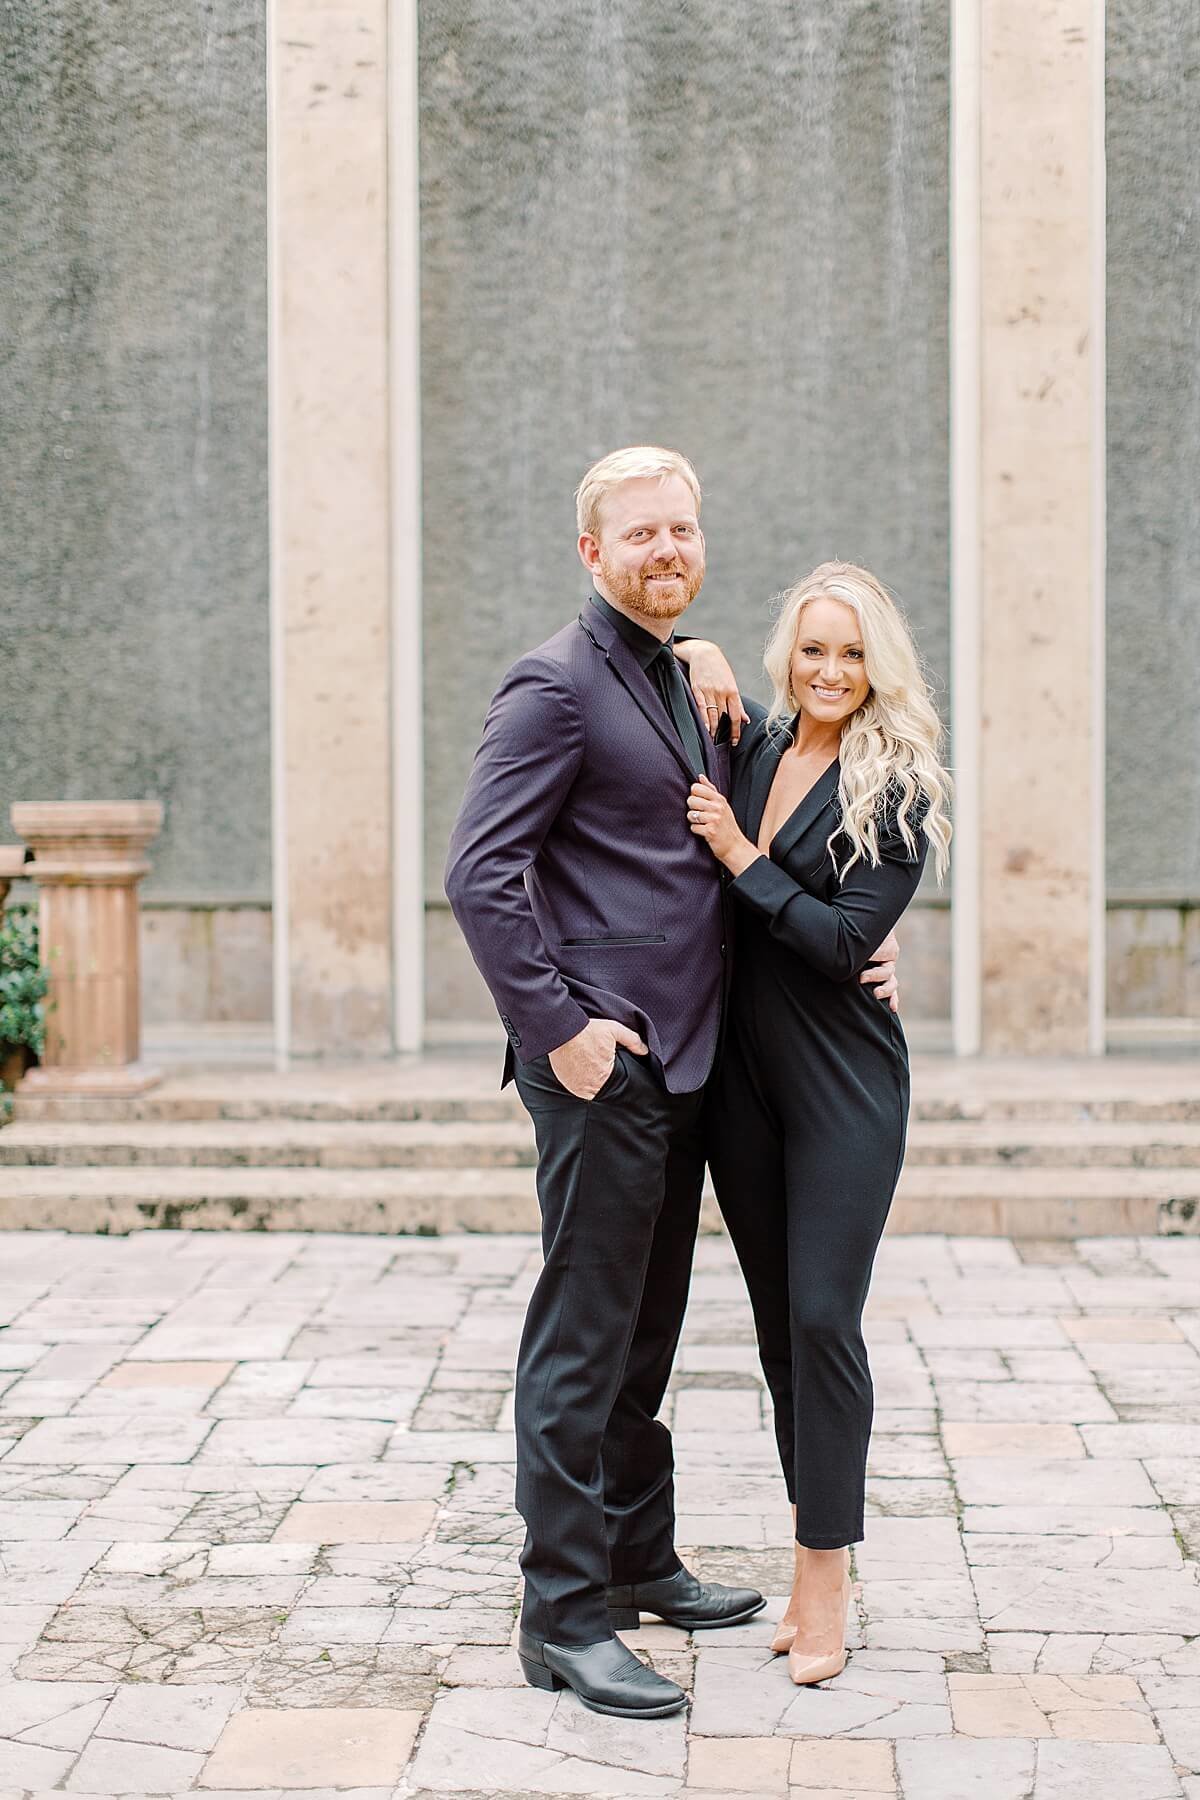 bell-tower-engagement-session-alicia-yarrish-photography-7